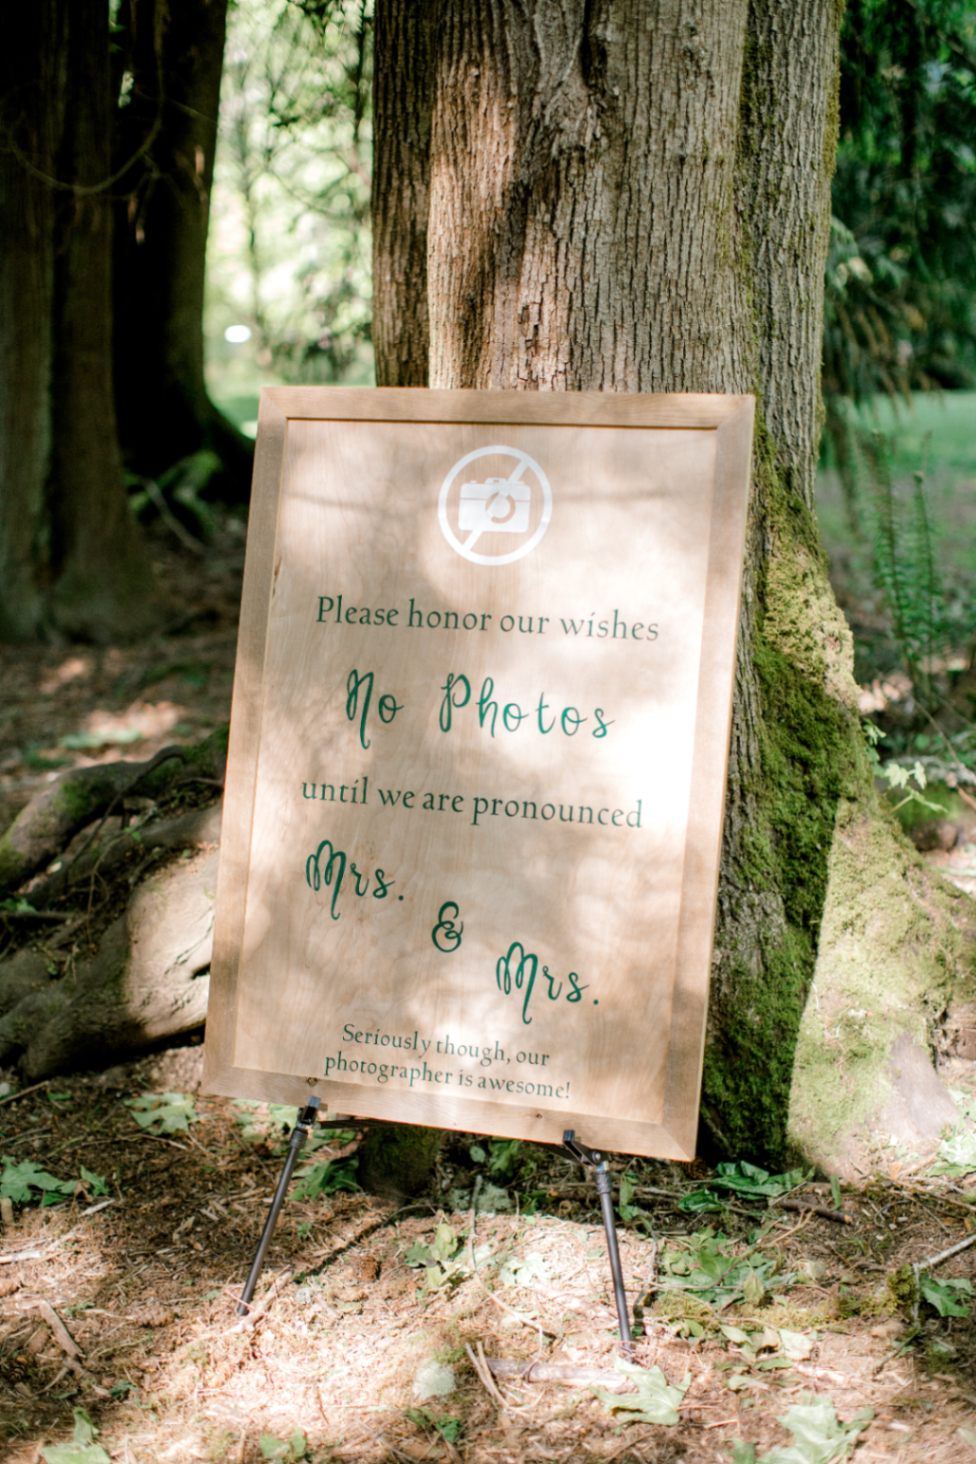 Framed wooden sign for wedding reception that has an icon of a camera with a line through it and the written message: Please honor our wishes No Photos until we are pronounced Mrs. and Mrs. Seriously though, our photographer is awesome!